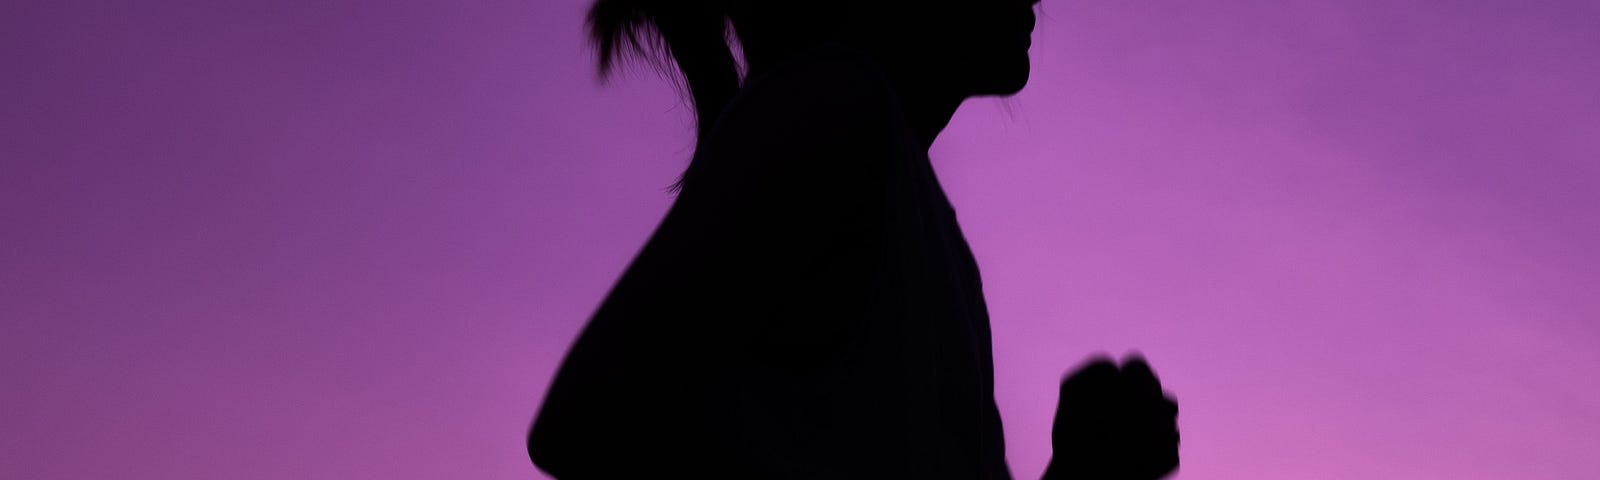 Silhouette of girl running at night, against a purple sky